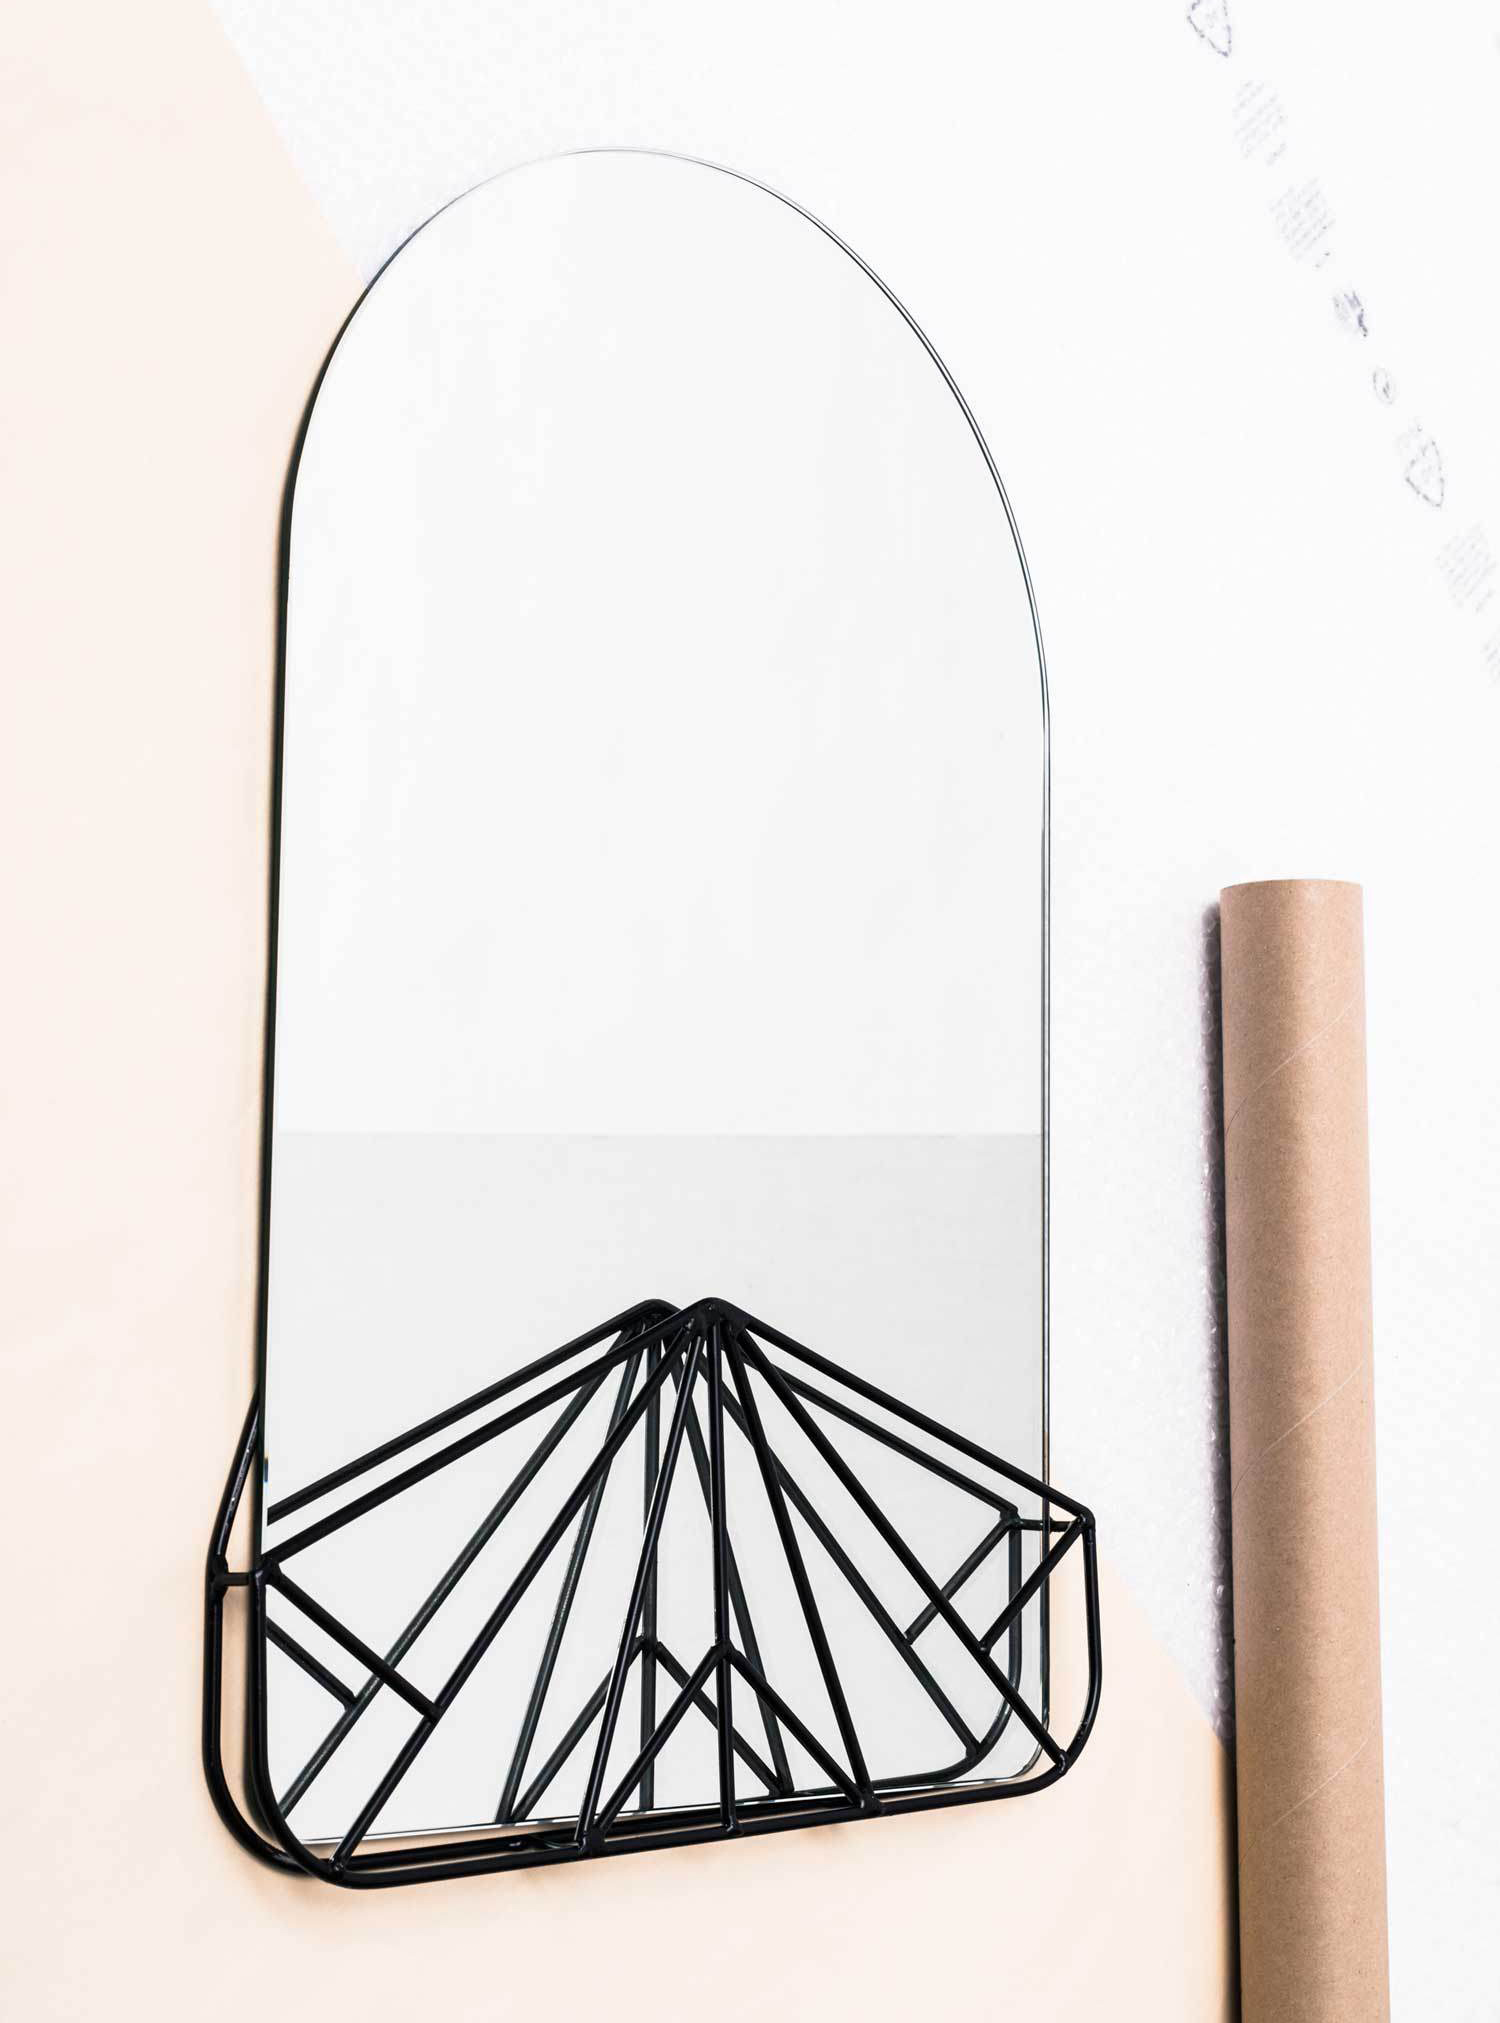 Vanity Affair, a rounded beauty mirror nested in a geometry of metal wire, by Gioria Zanellato